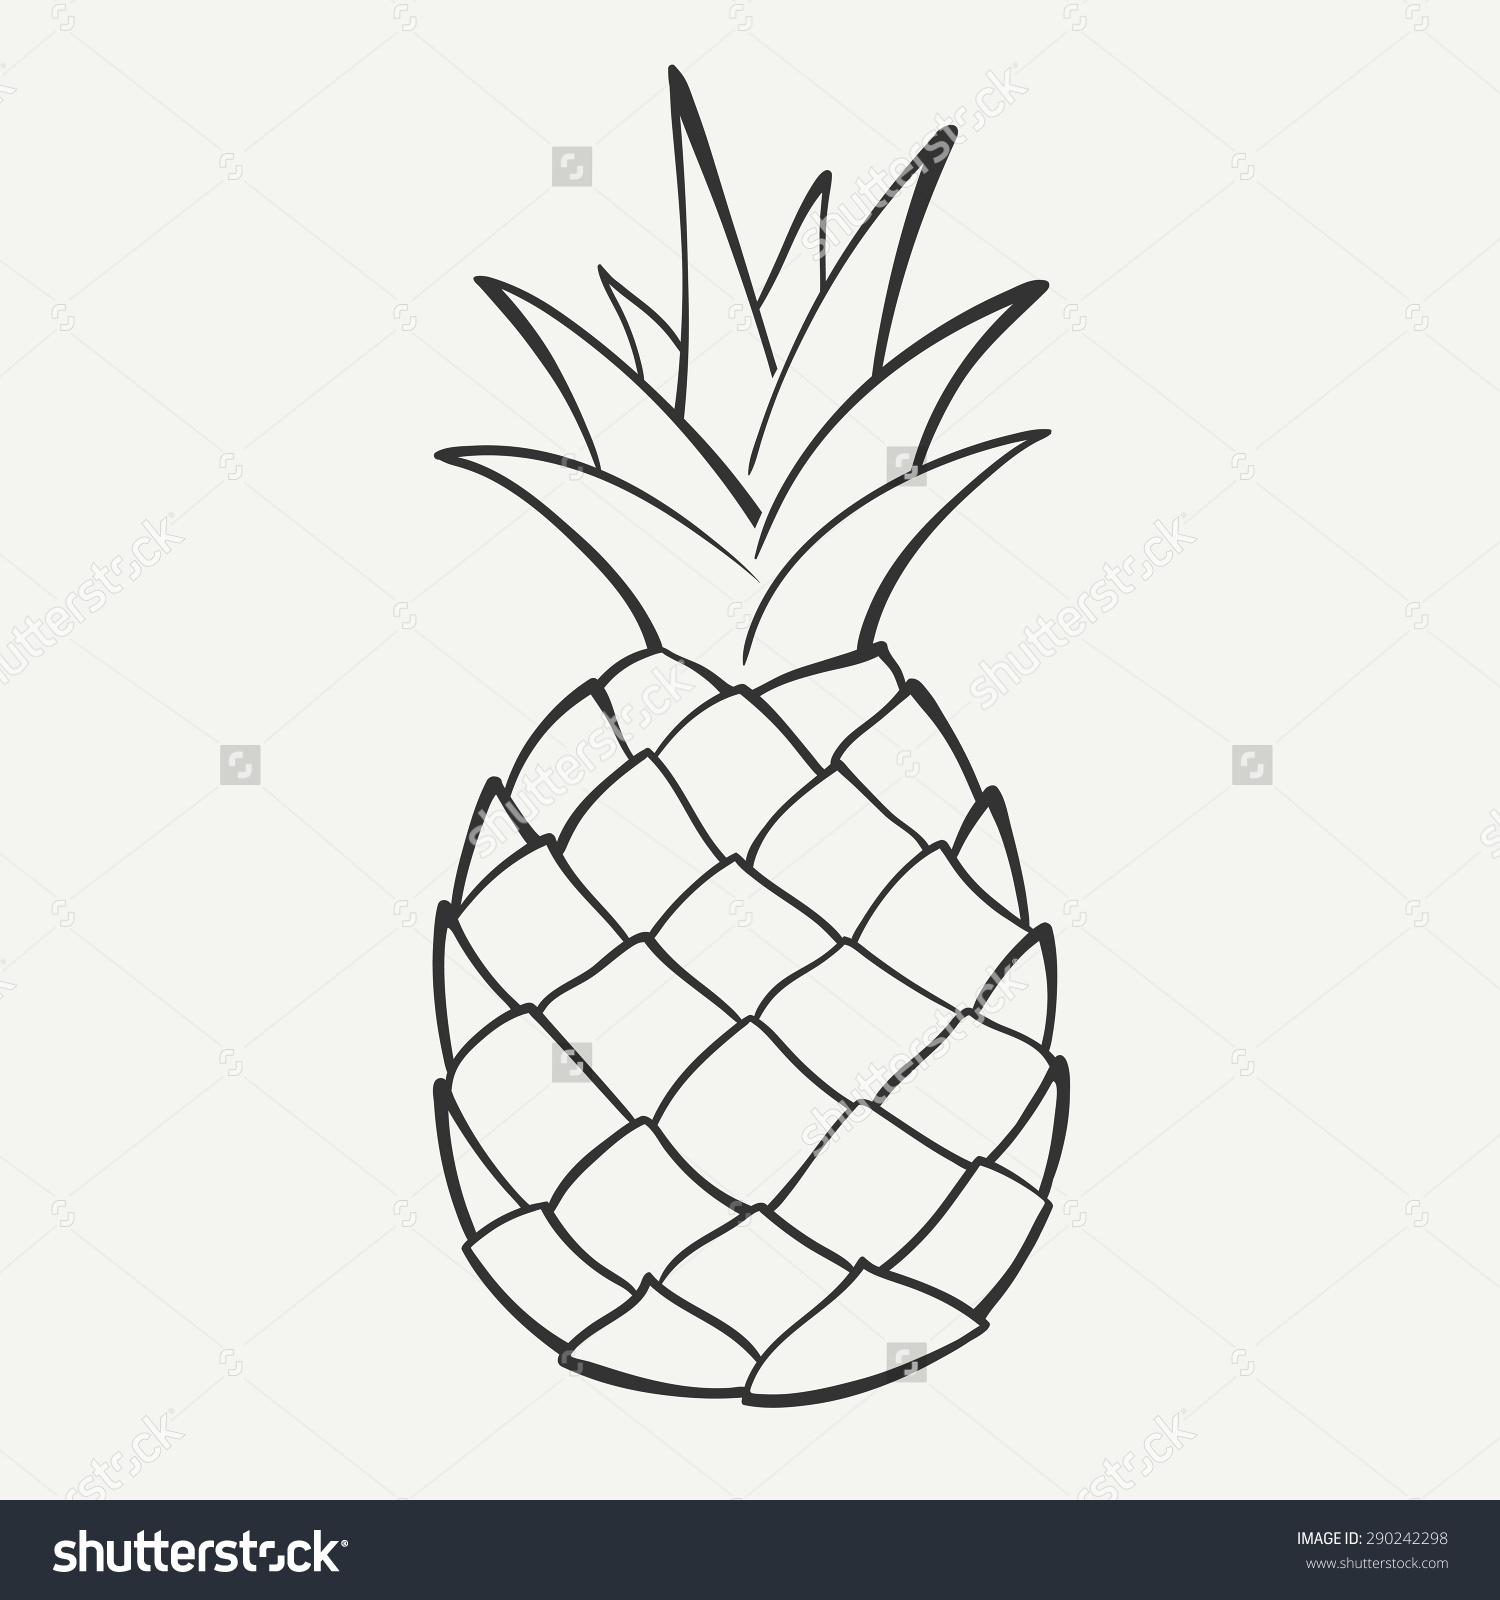 Black and White Pineapple Vector